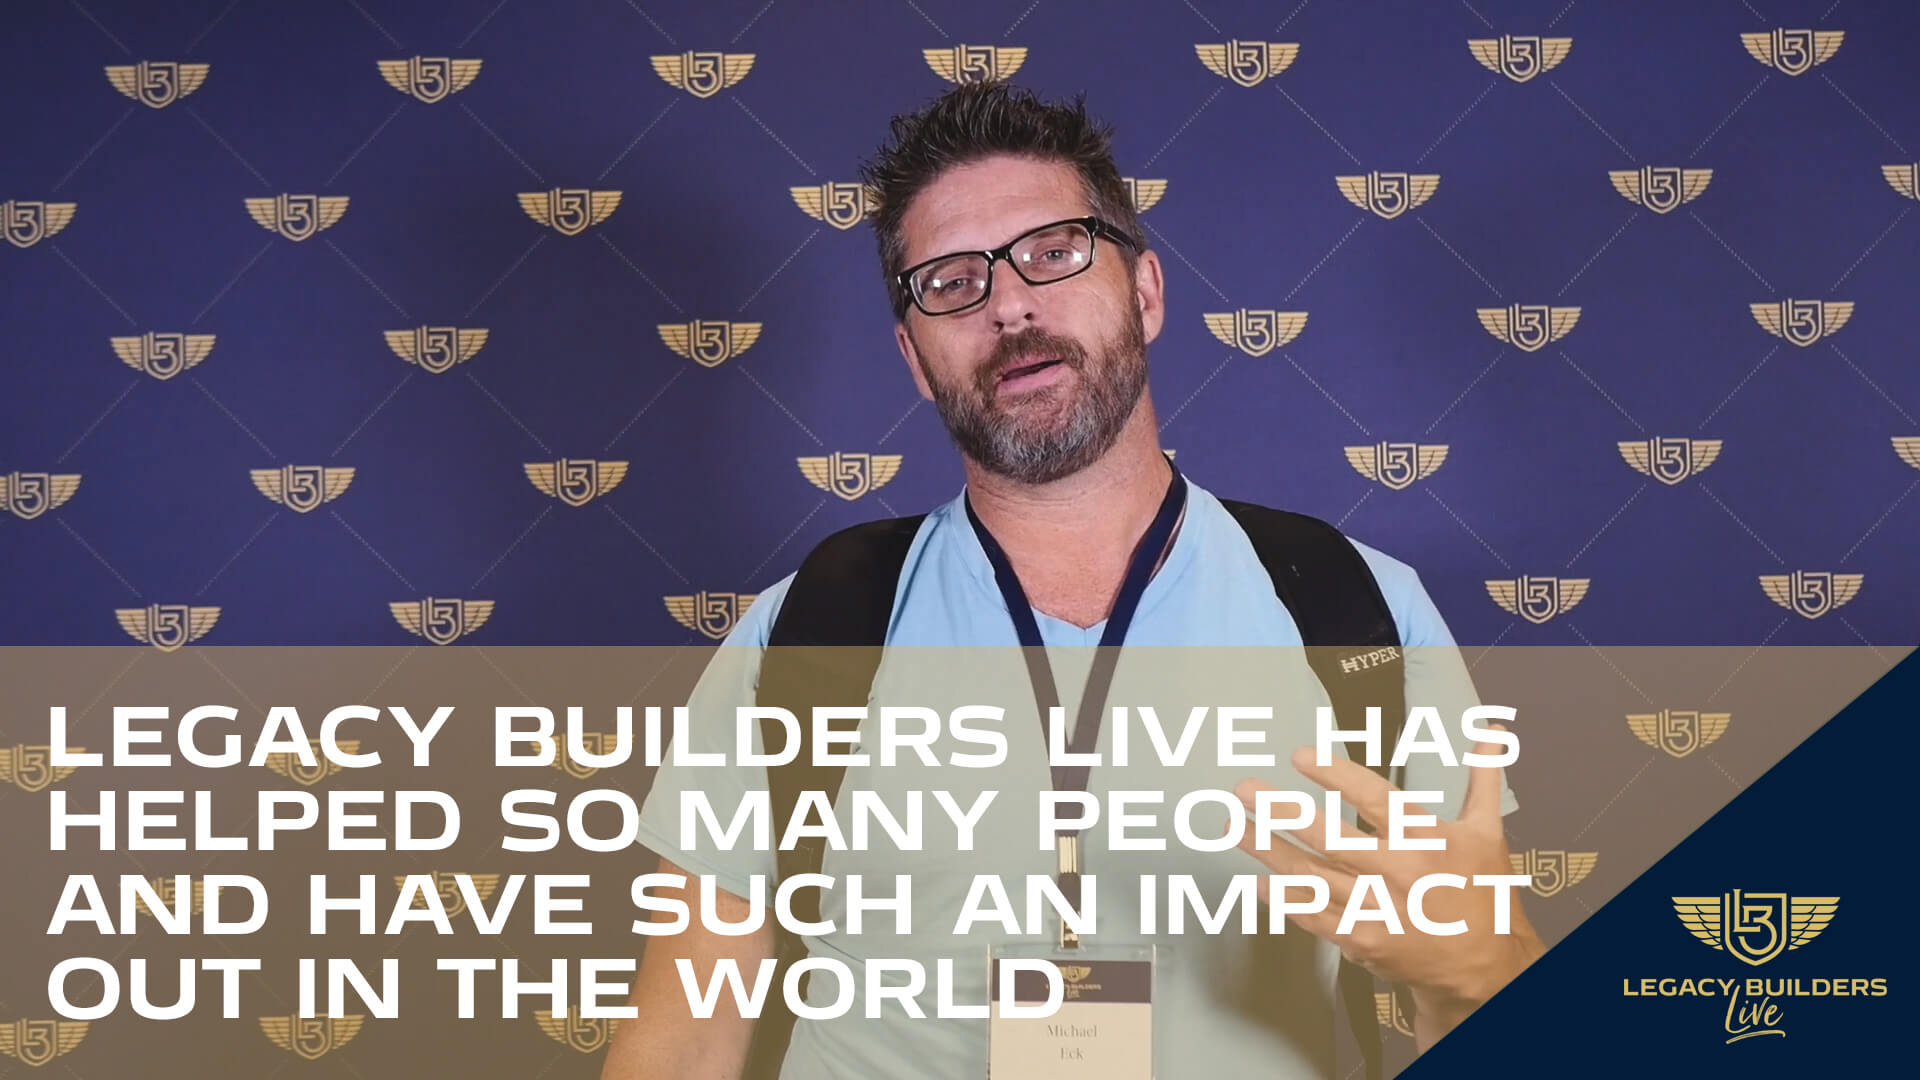 Legacy Builders Live has helped so many people and have such an impact out in the world